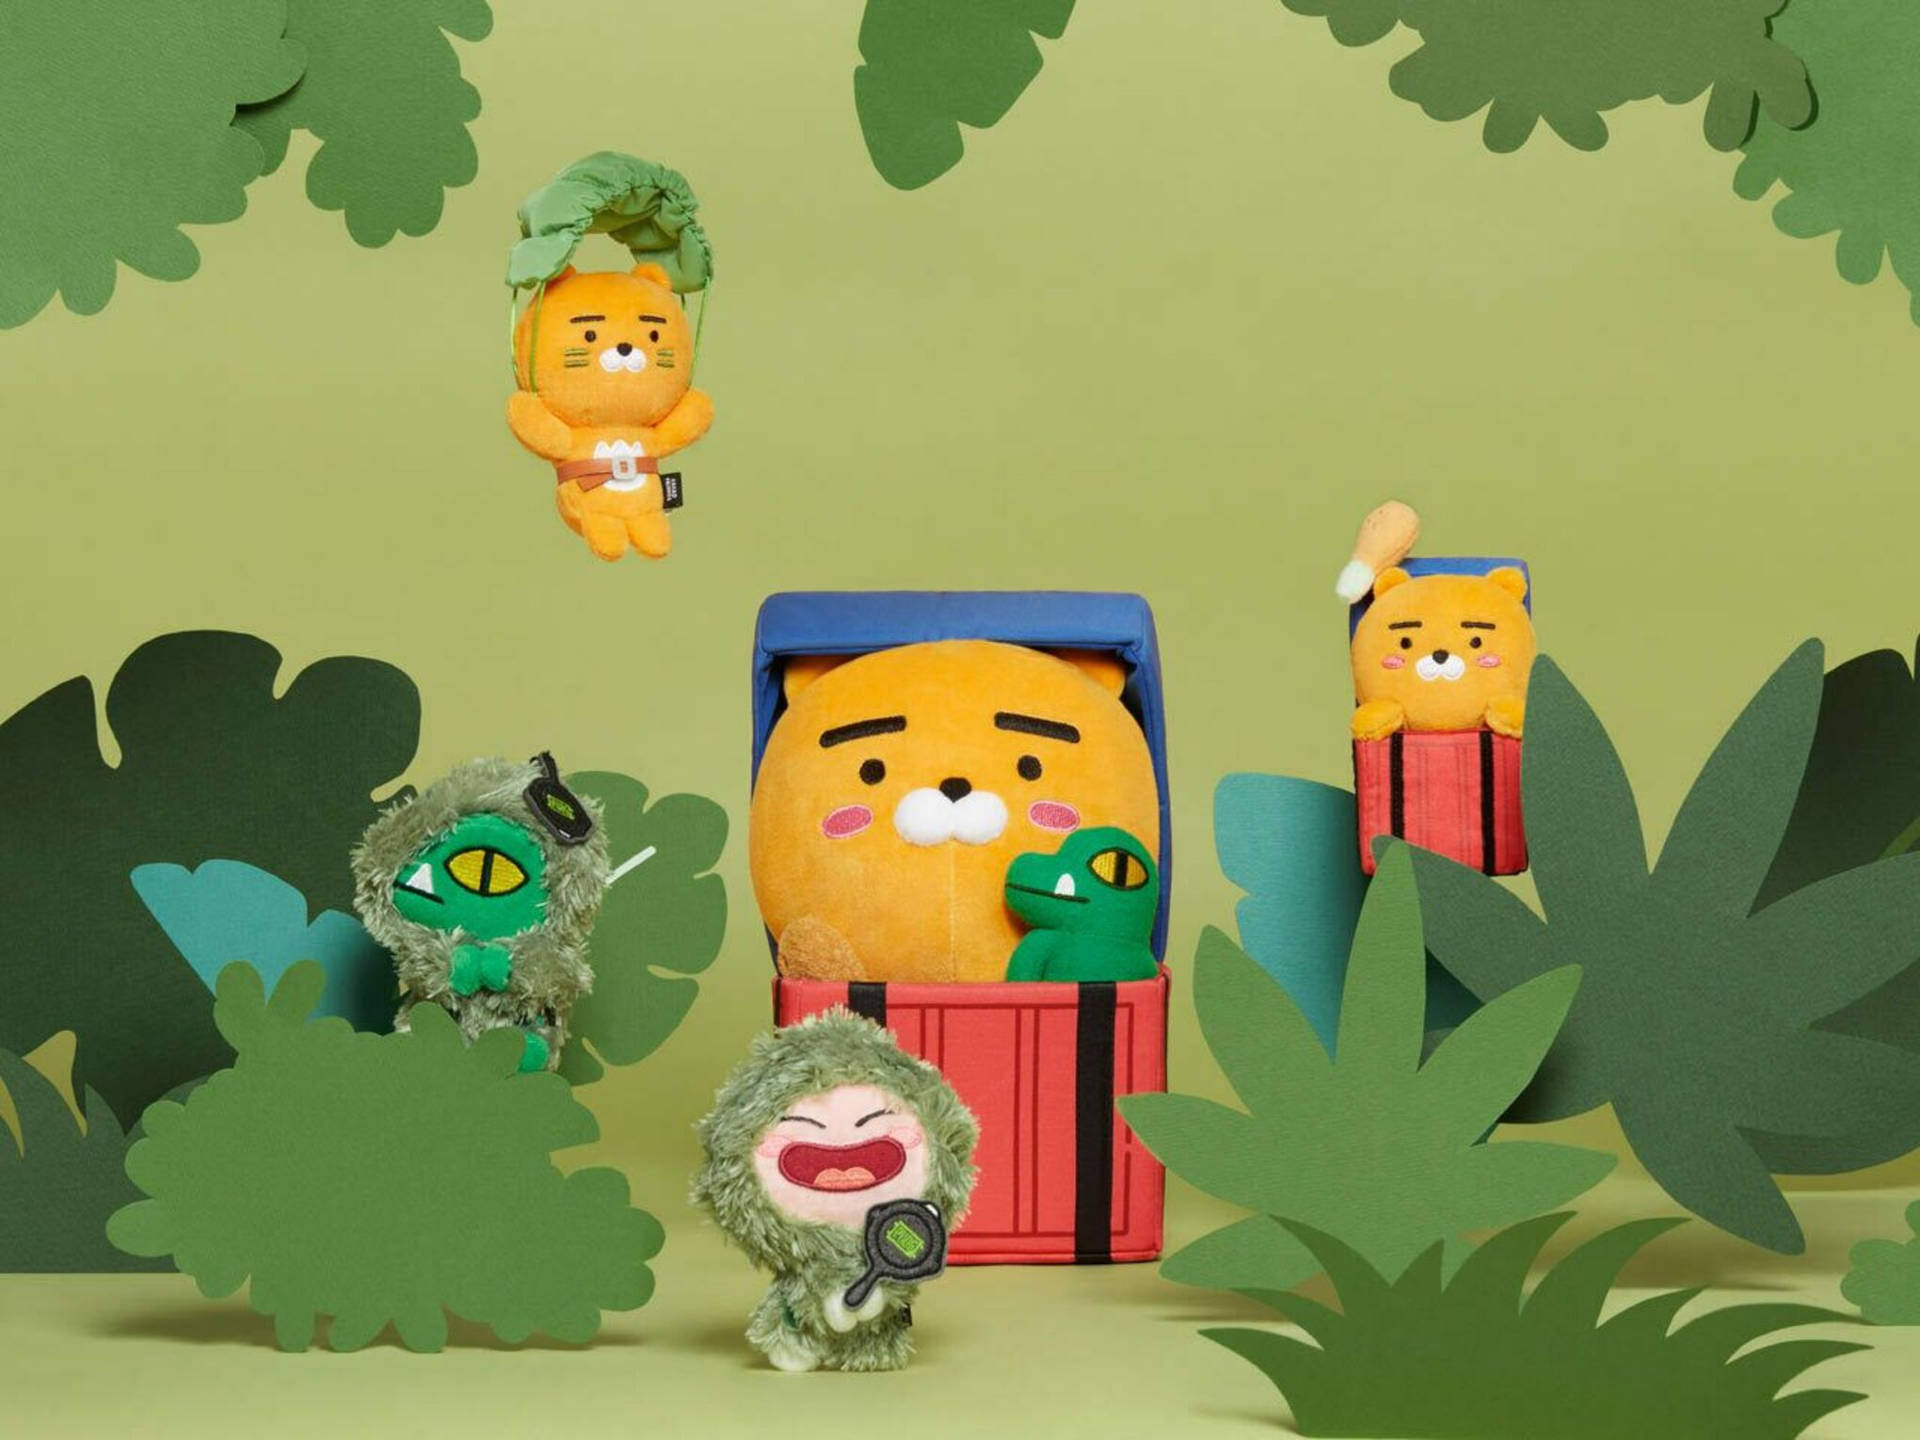 Join the gang of fun and adventure with the Kakao Friends at the Green Jungle! Wallpaper